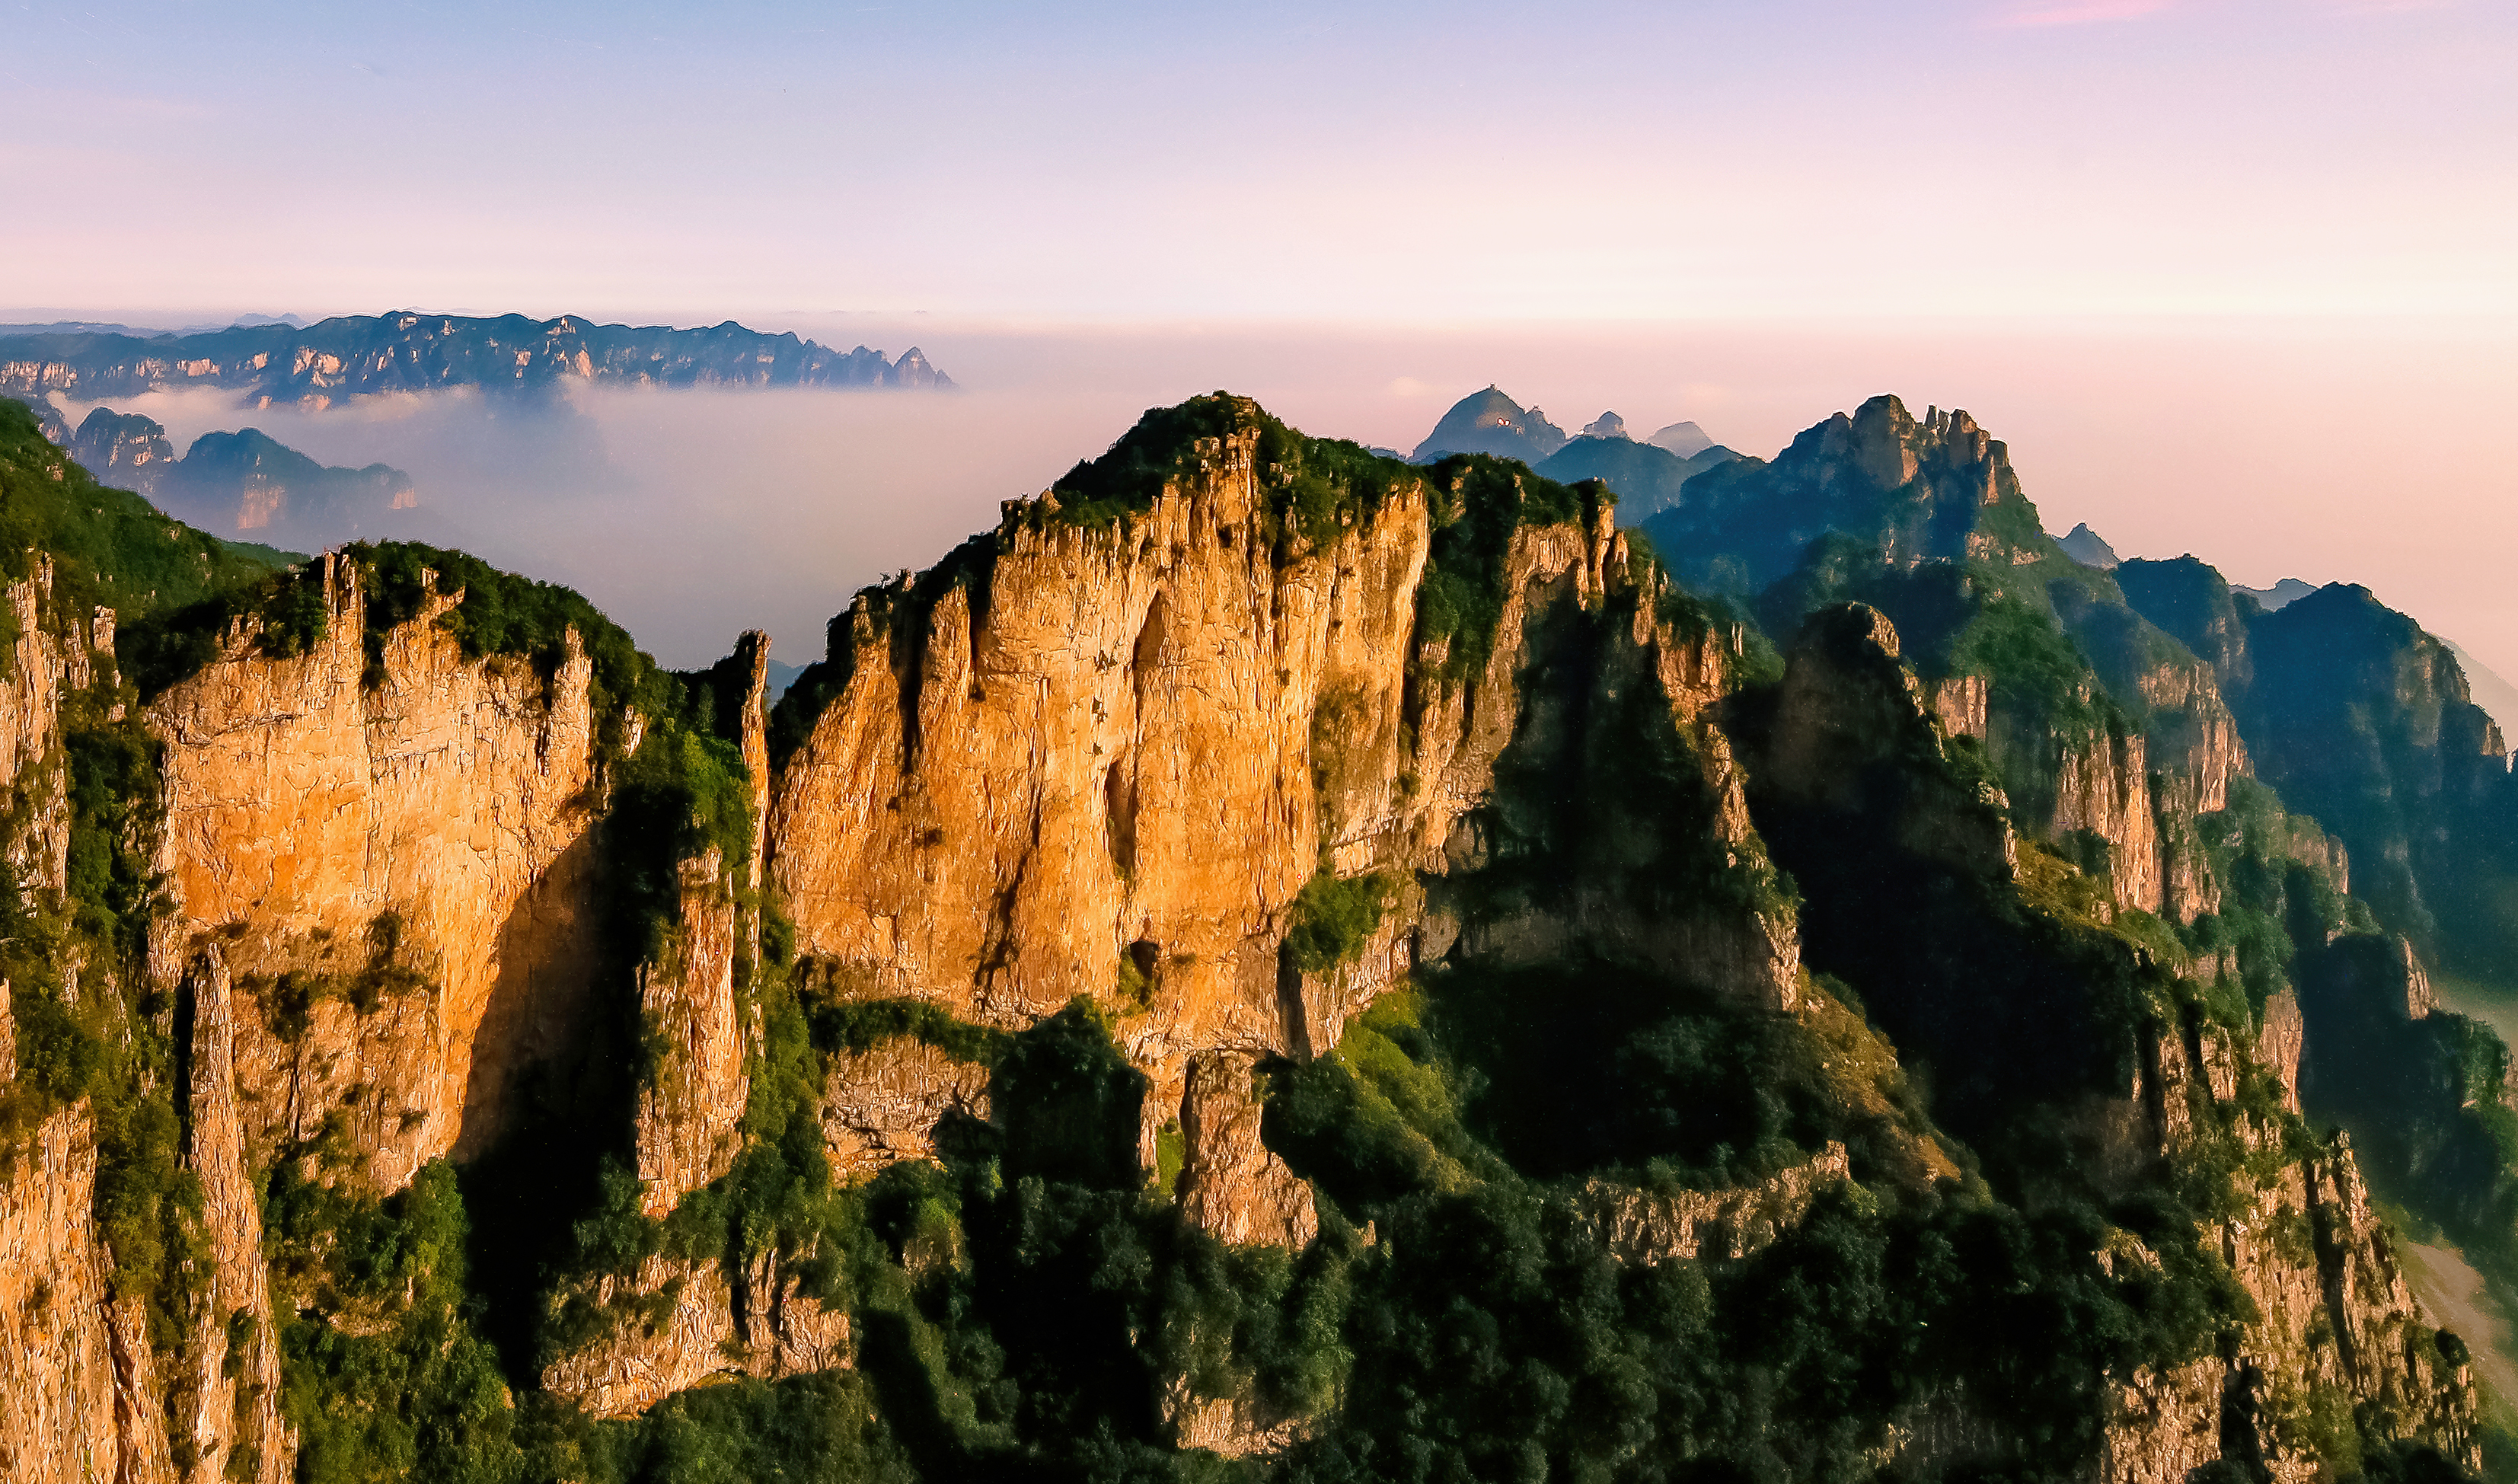 Taihang Mountain miracle: Connecting remote village with world beyond